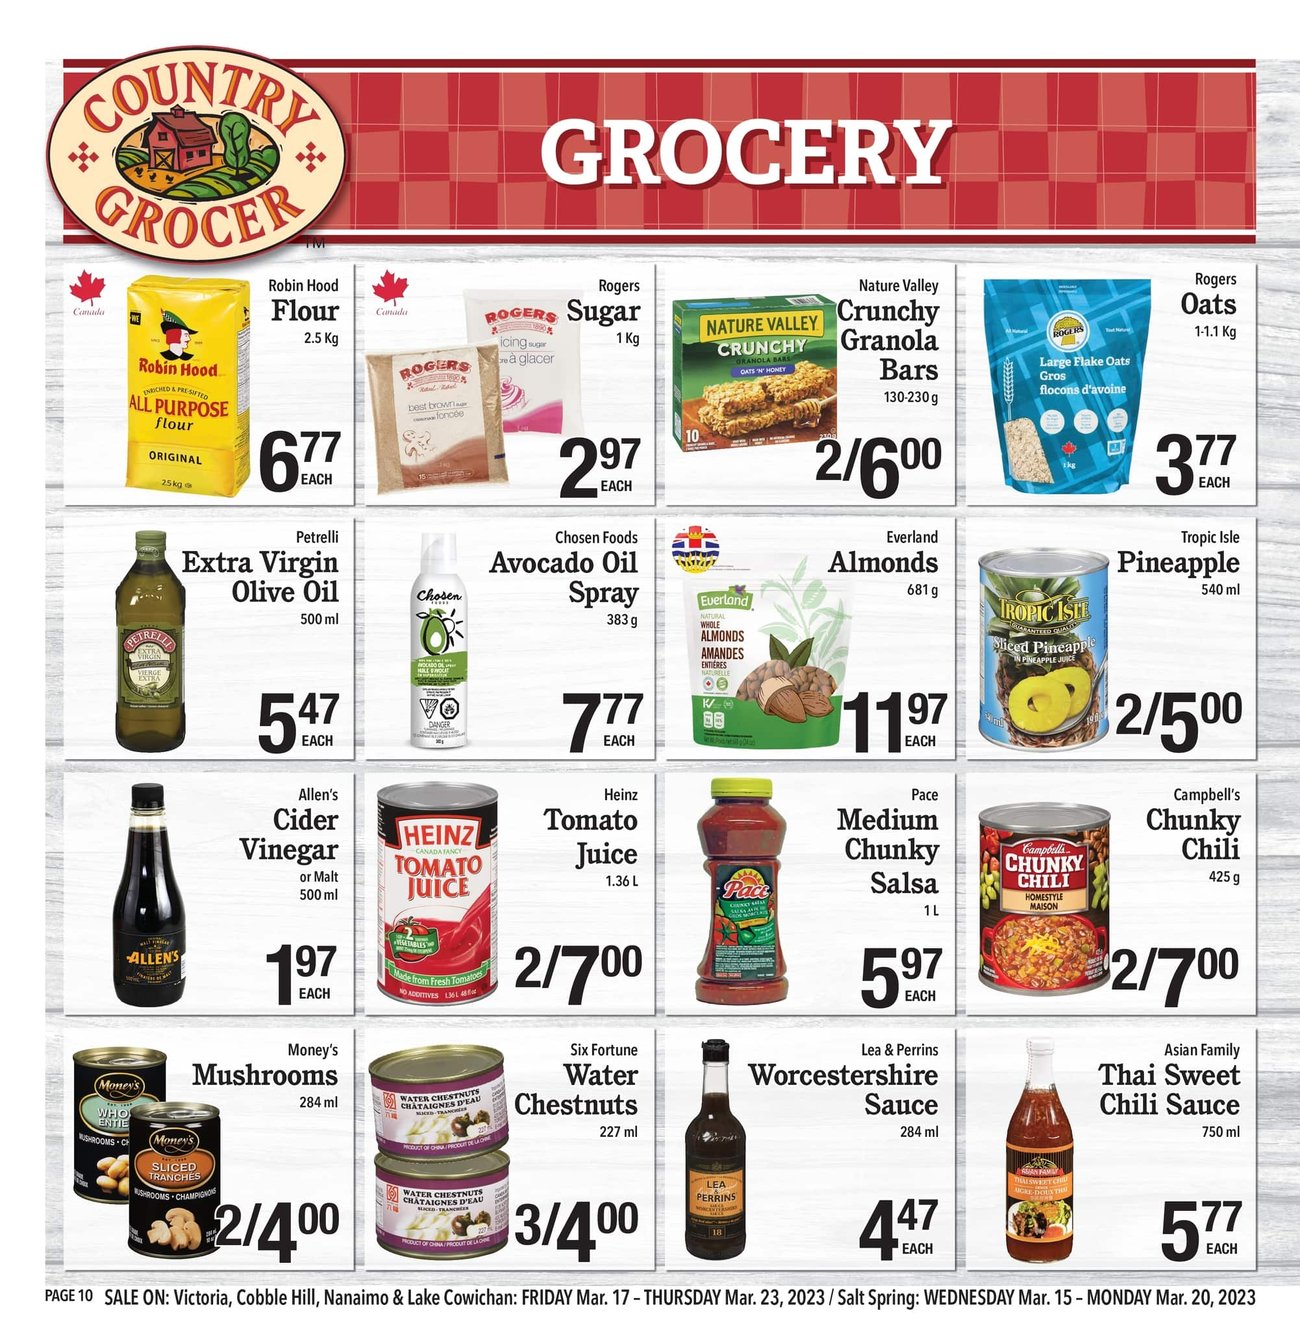 Country Grocer - Weekly Flyer Specials - Page 10